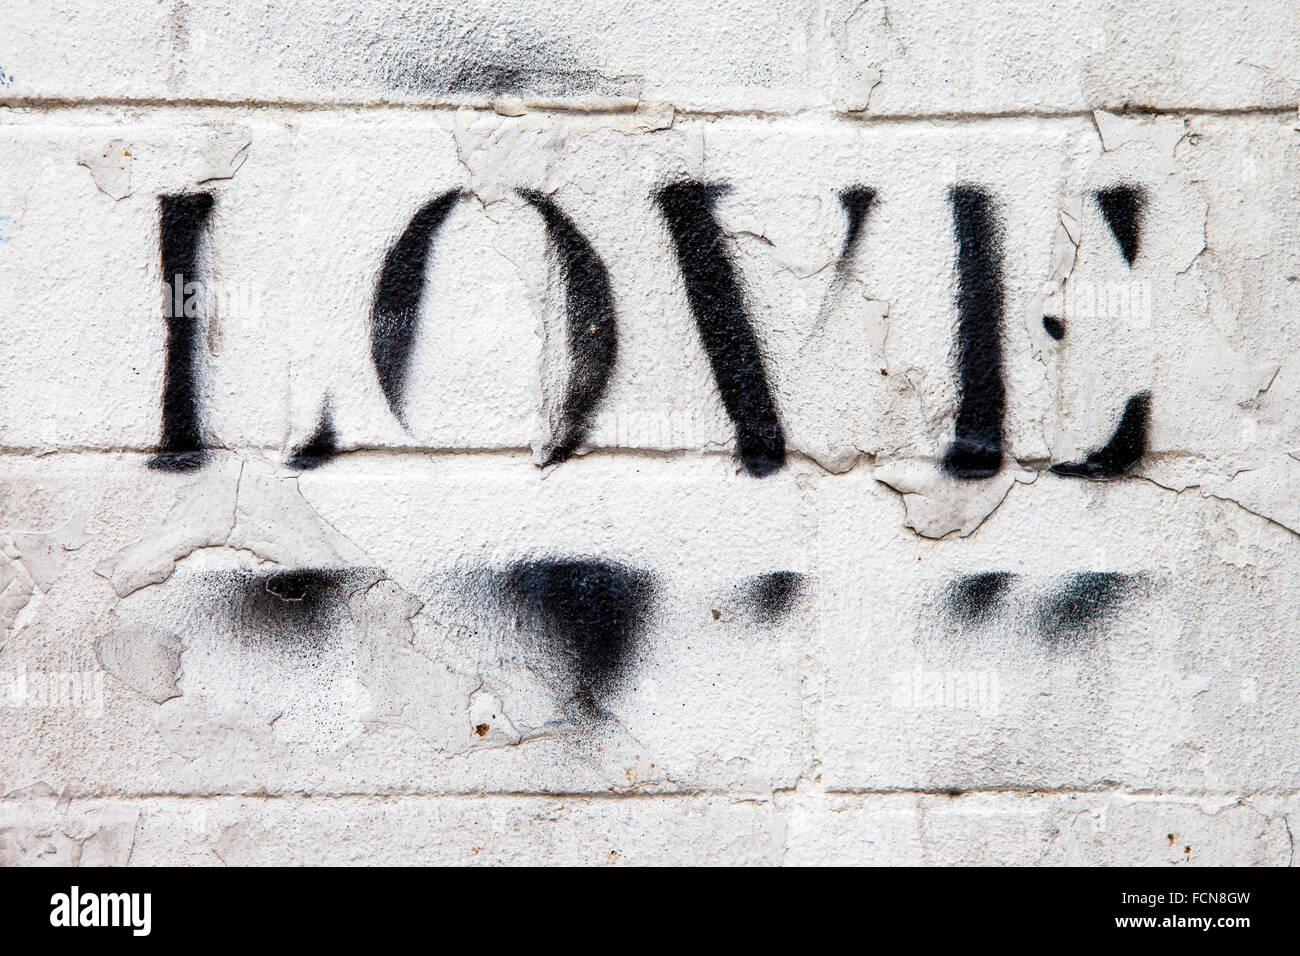 LONDON, UK - JANUARY 13TH 2016: The word LOVE sprayed onto a brick wall in London, on 13th January 2016. Stock Photo